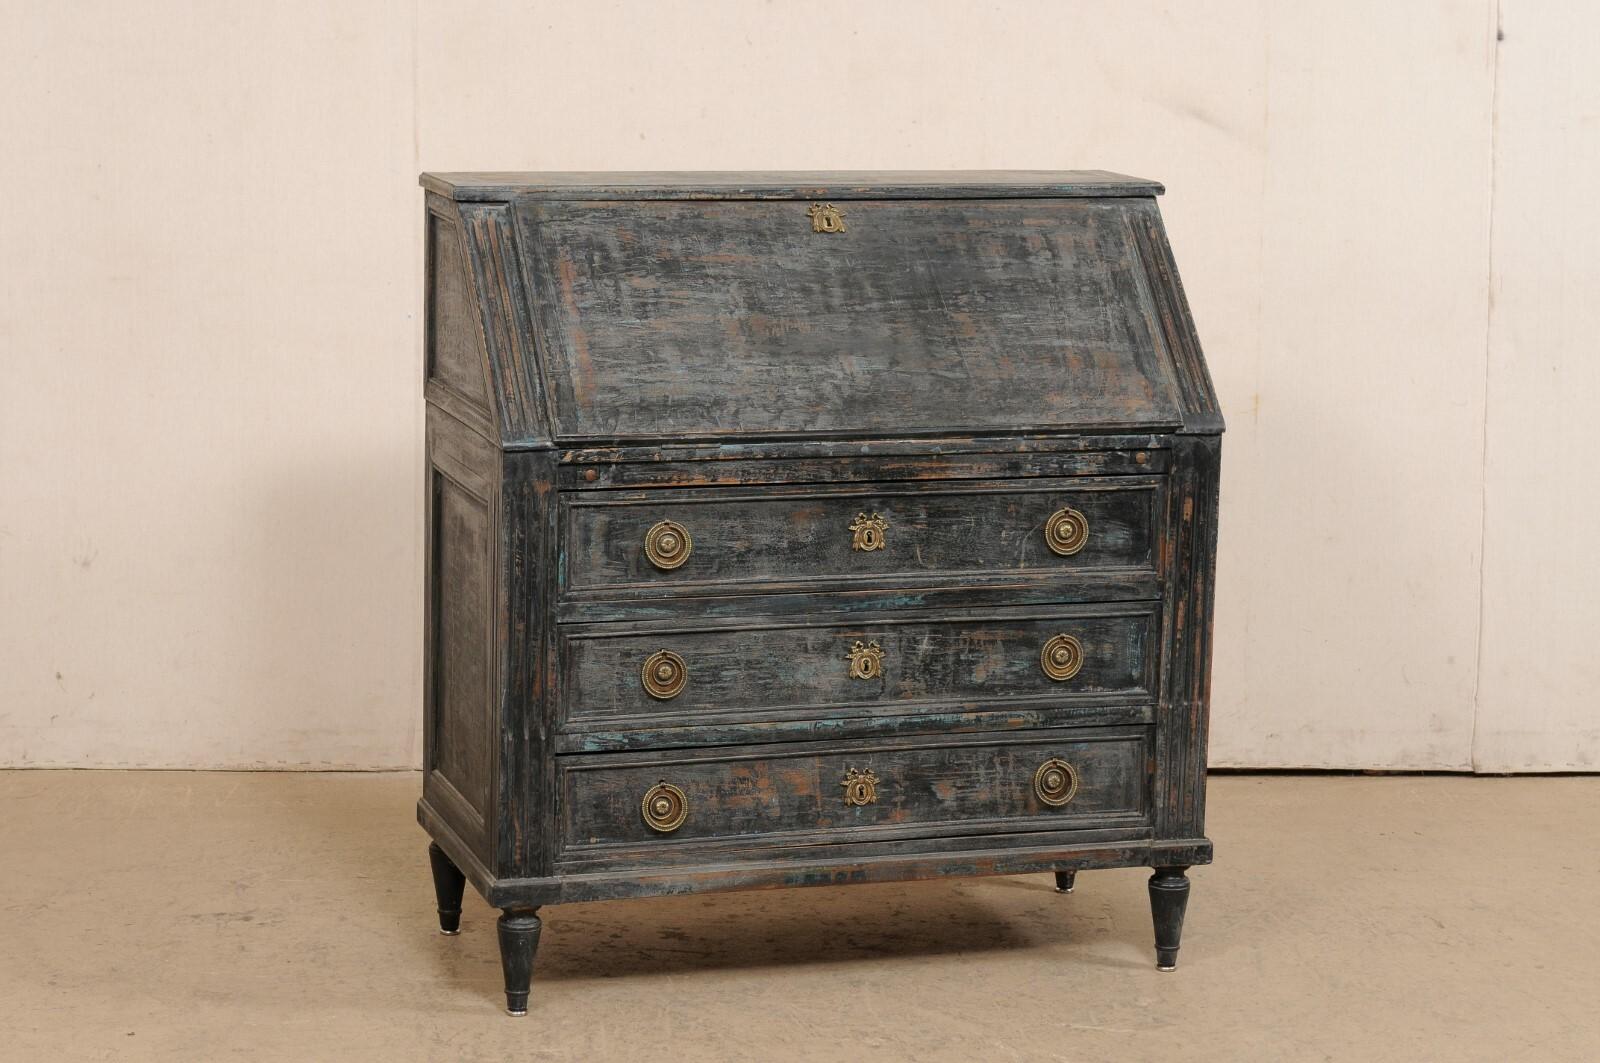 A French painted wood secretary chest from the 19th century. This antique slat front chest from France features a drop down/fall front door, which opens to a desk-top surface (complete with leather writing pad) and reveals interior shelving and